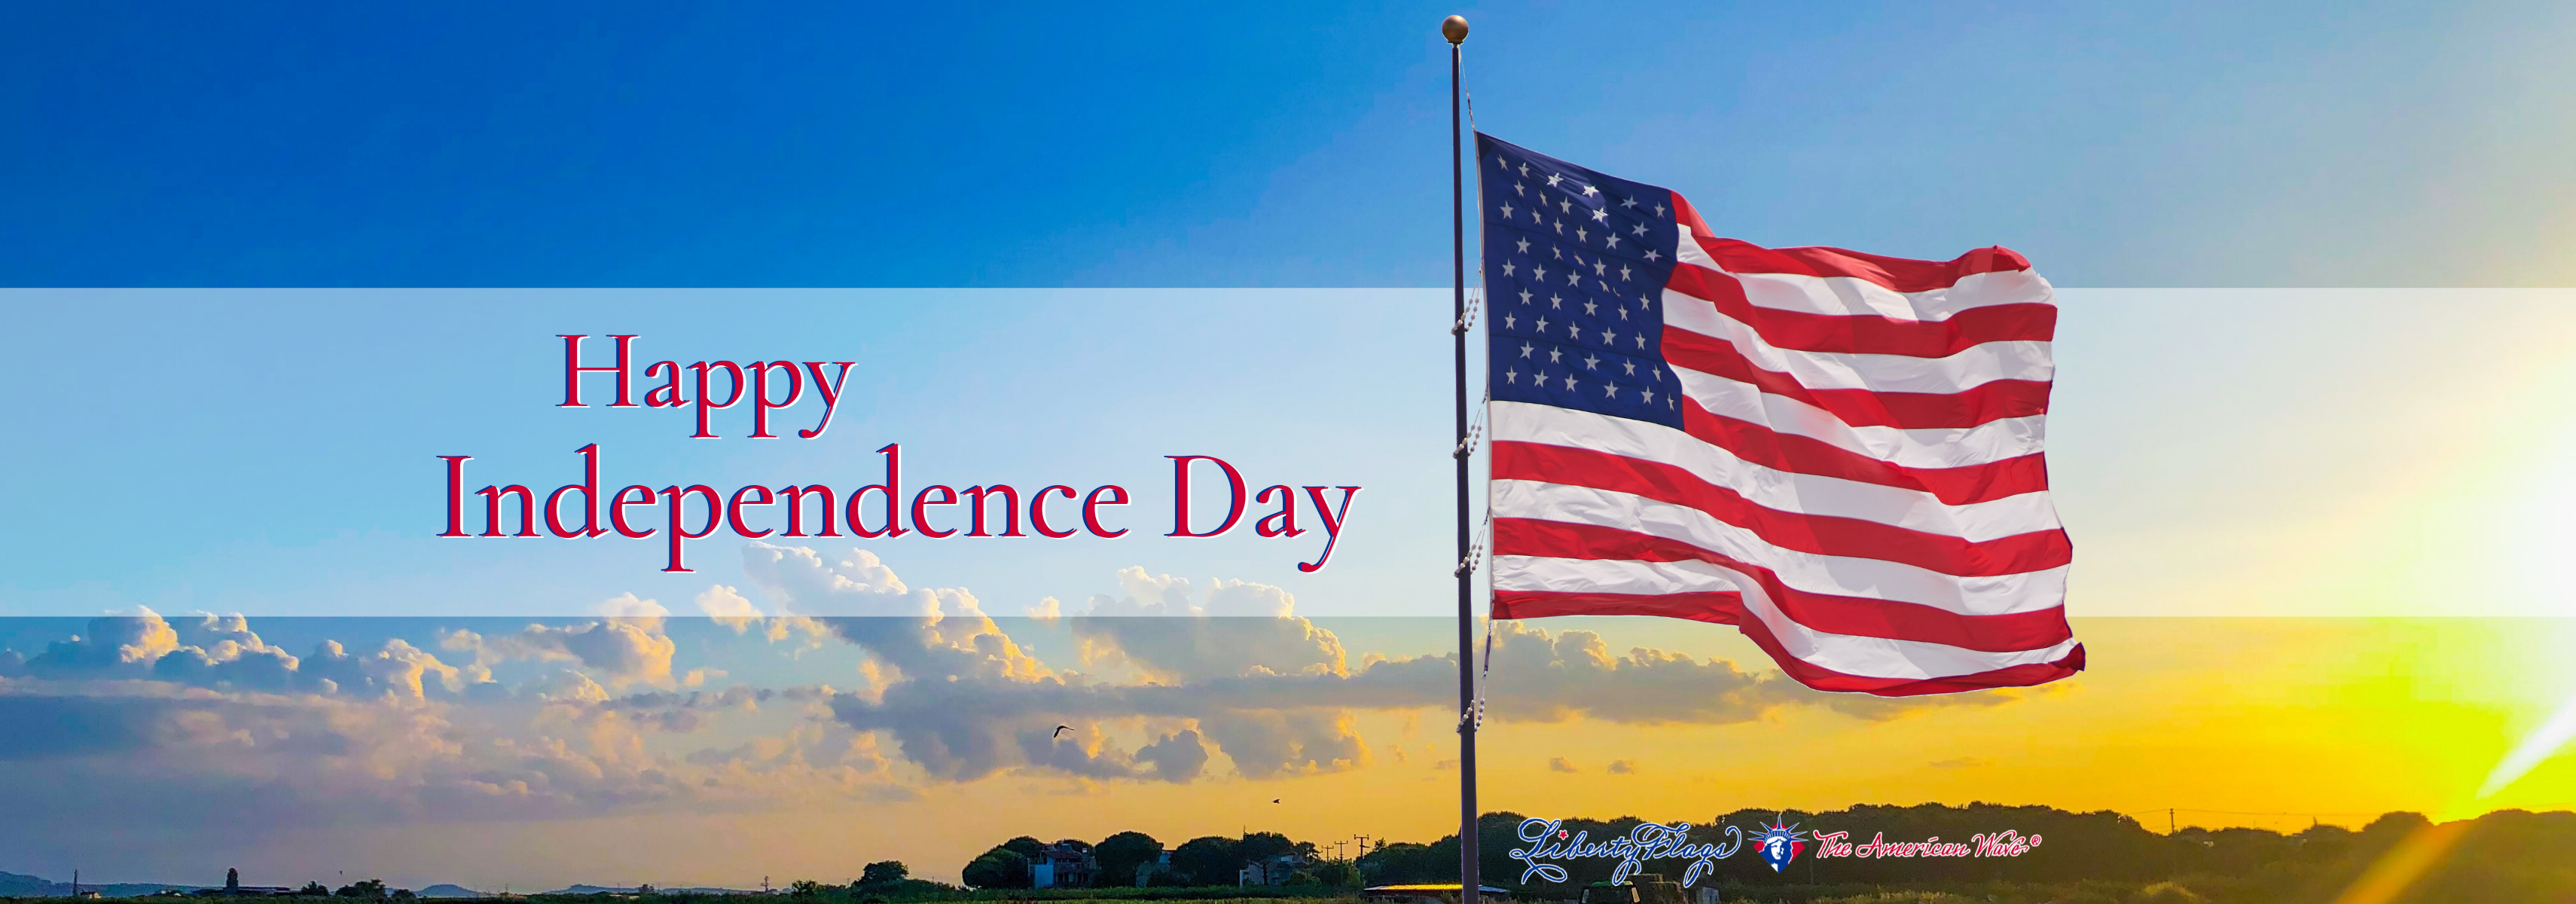 Happy Independence Day, from LIBERTY FLAGS, The American Wave®